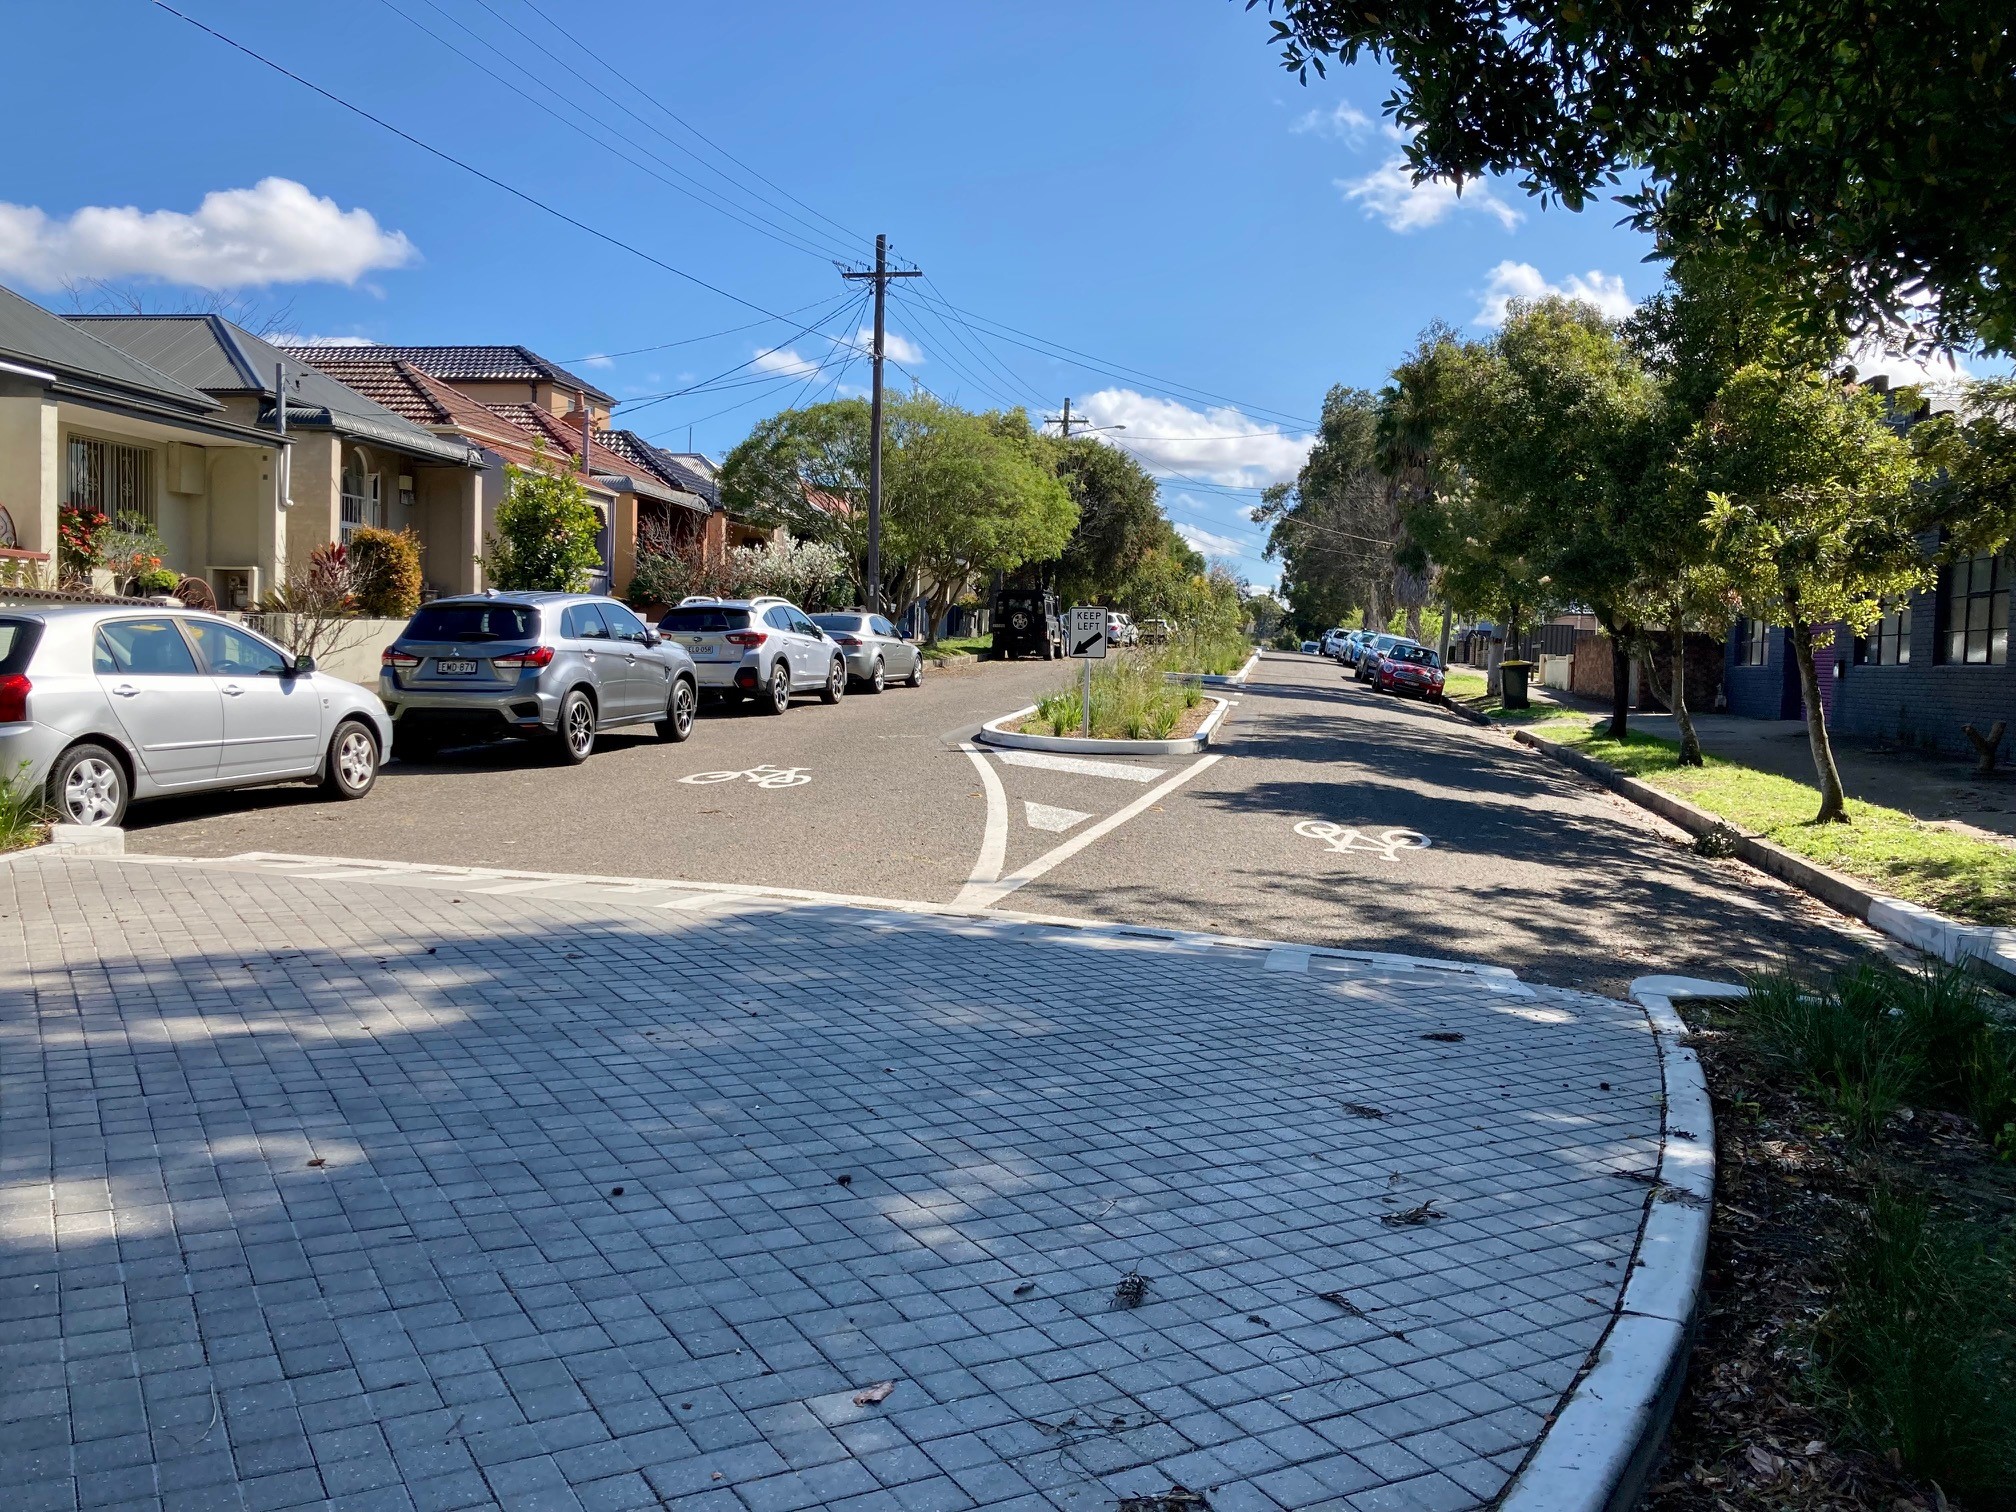 Shared path and traffic calming on Weston Street